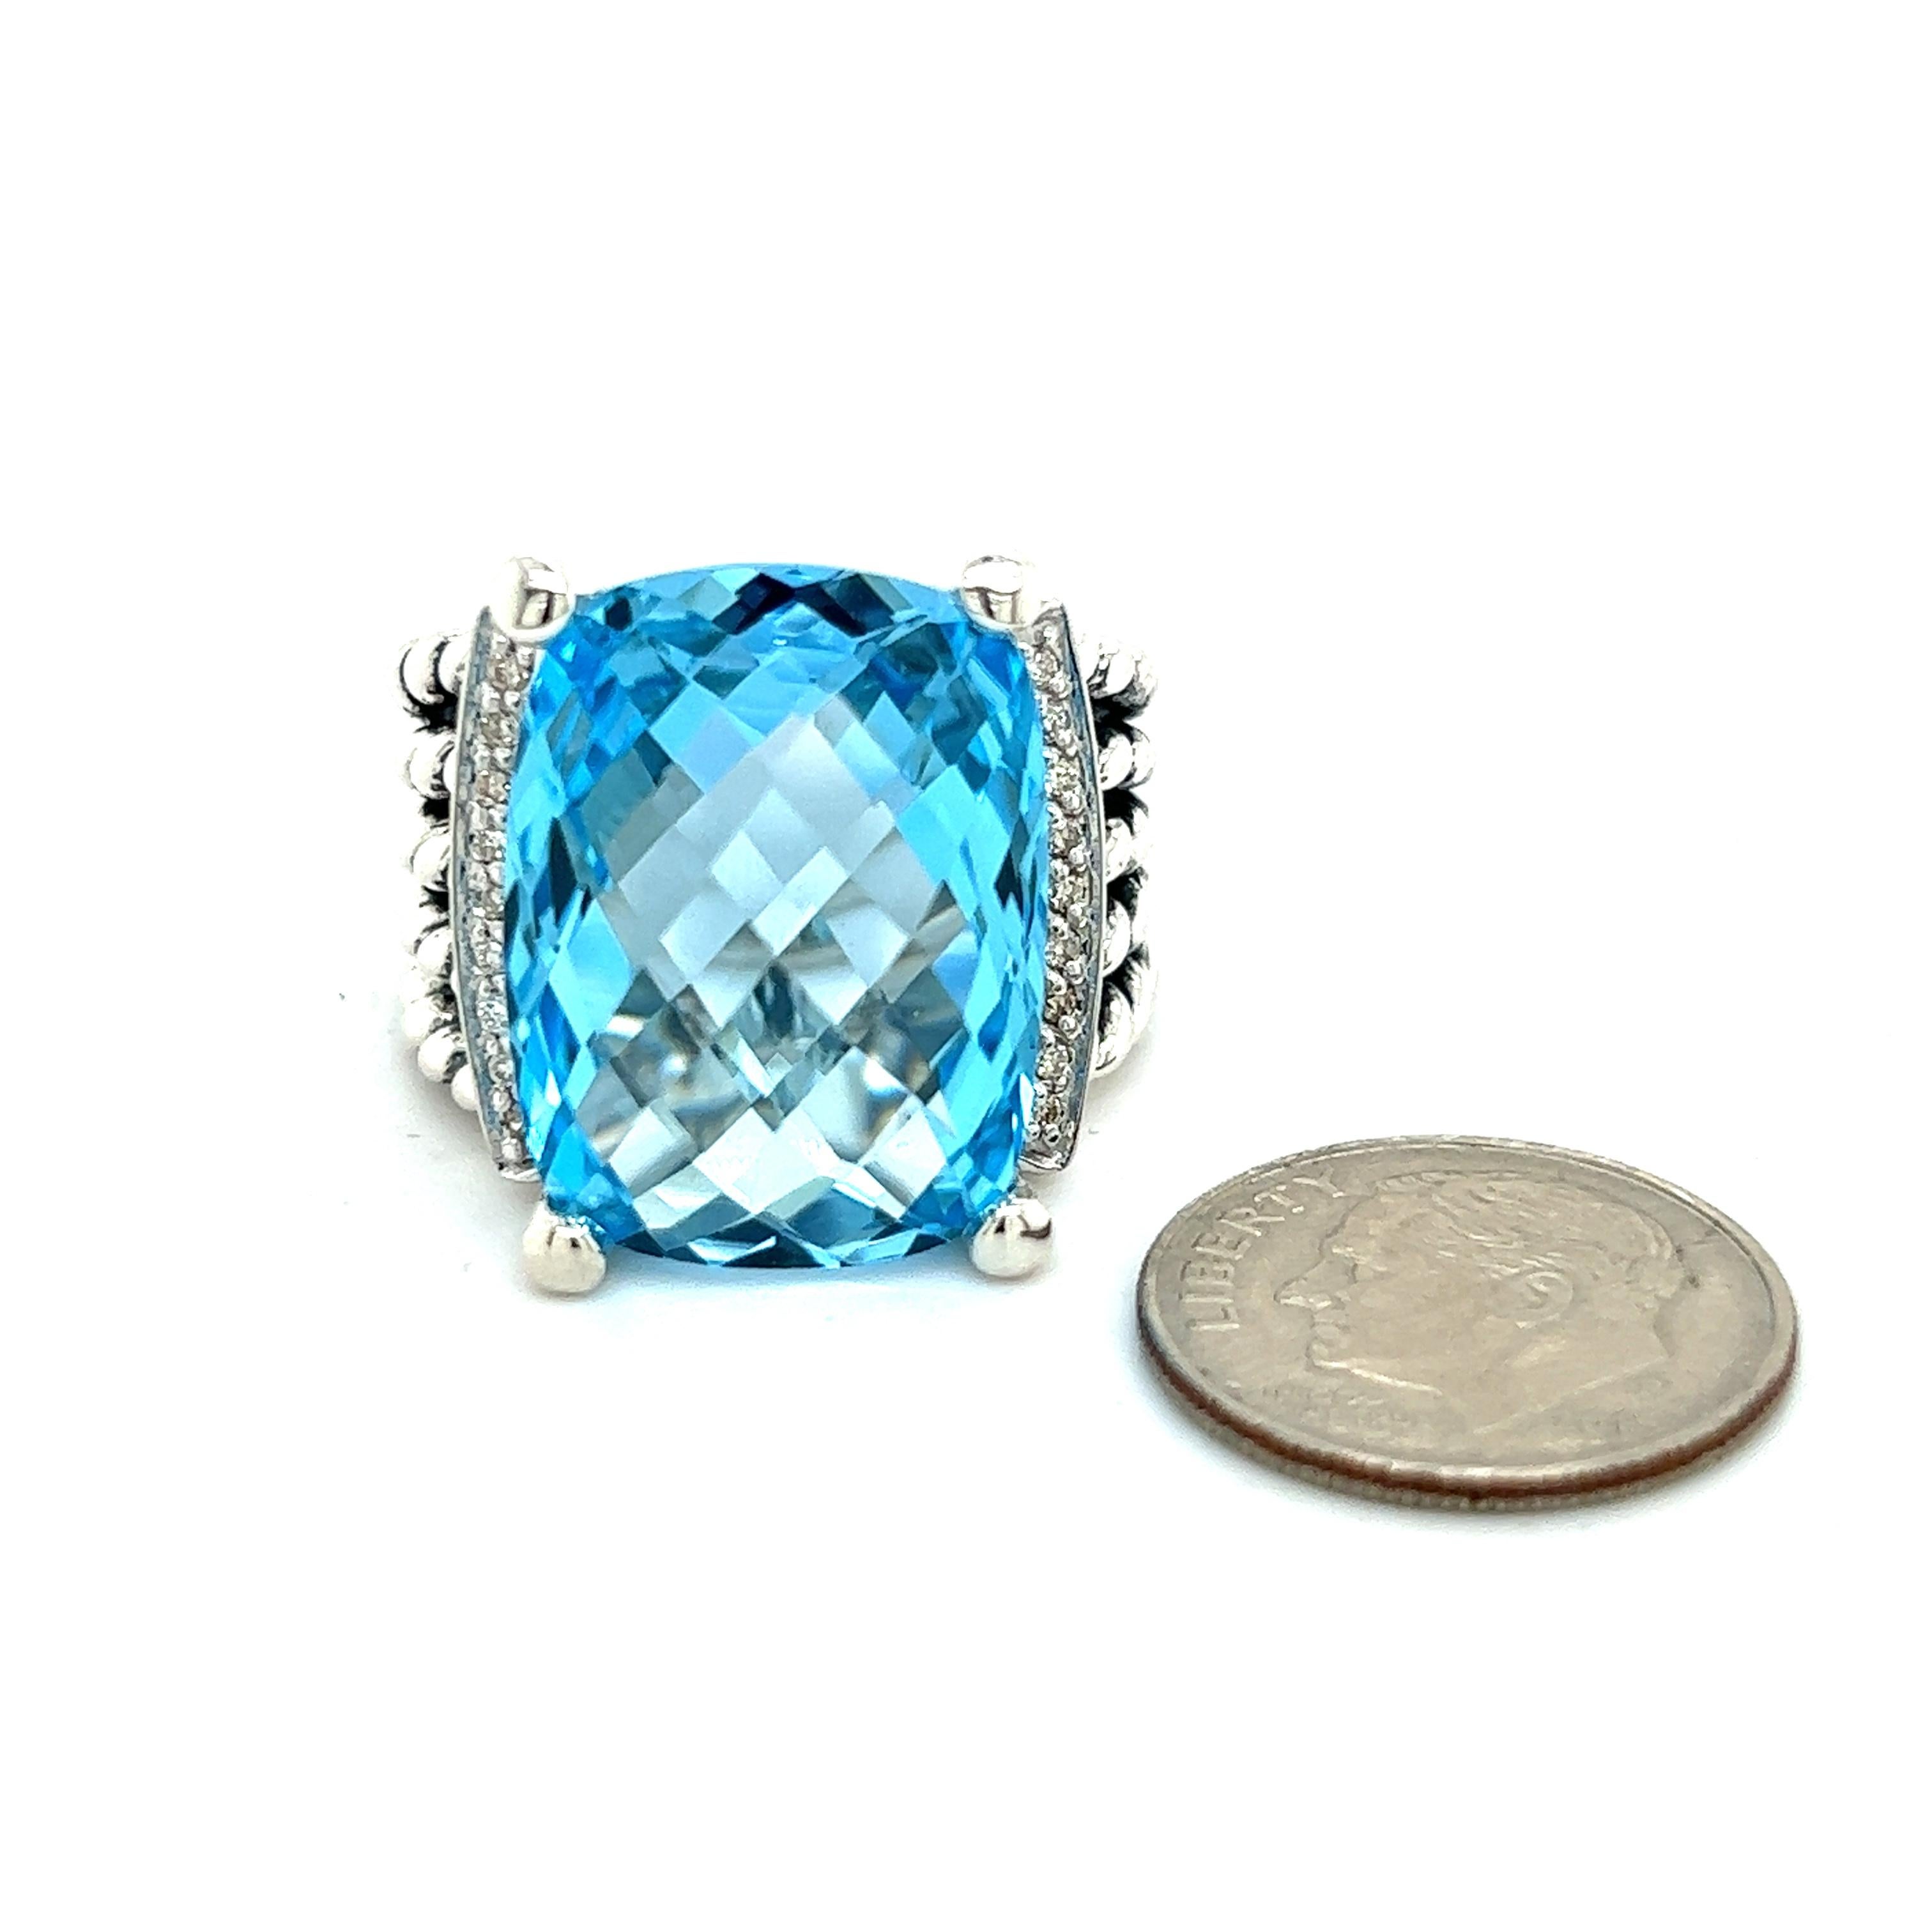 David Yurman Authentic Estate Wheaton Blue Topaz Pave Diamond Ring 8.5 Silver 16 x 12 DY240

Retail $1,599.00

This elegant Authentic David Yurman ring is made of sterling silver.

TRUSTED SELLER SINCE 2002

PLEASE SEE OUR HUNDREDS OF POSITIVE